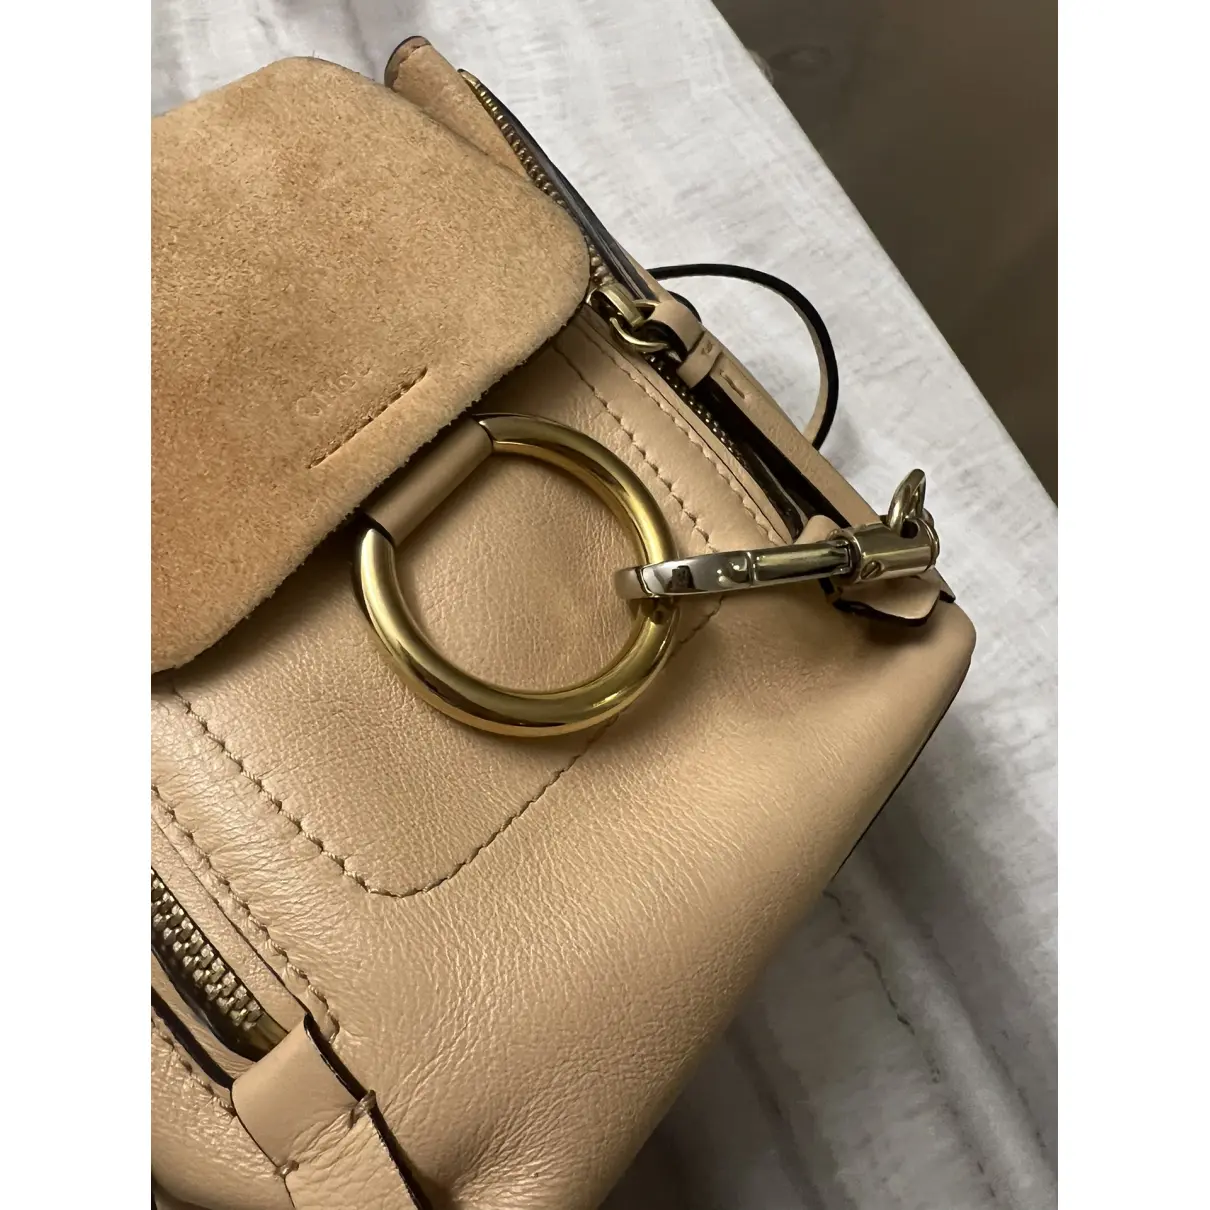 Buy Chloé Faye leather backpack online